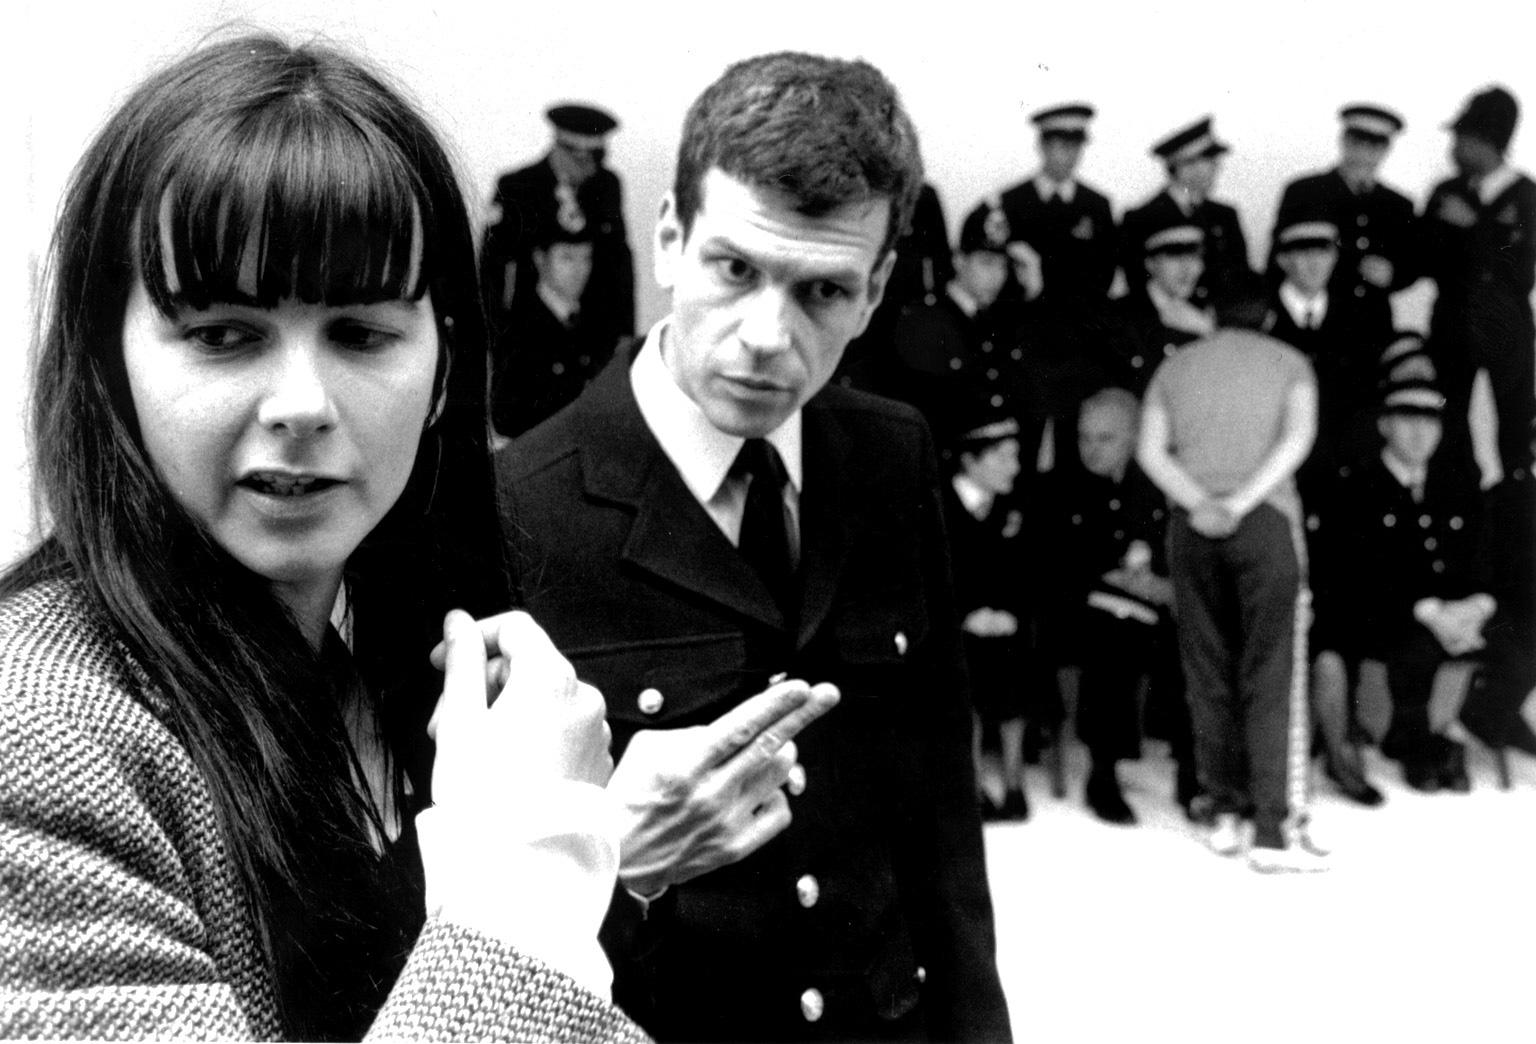 Gillian Wearing with the police officers in the 90s